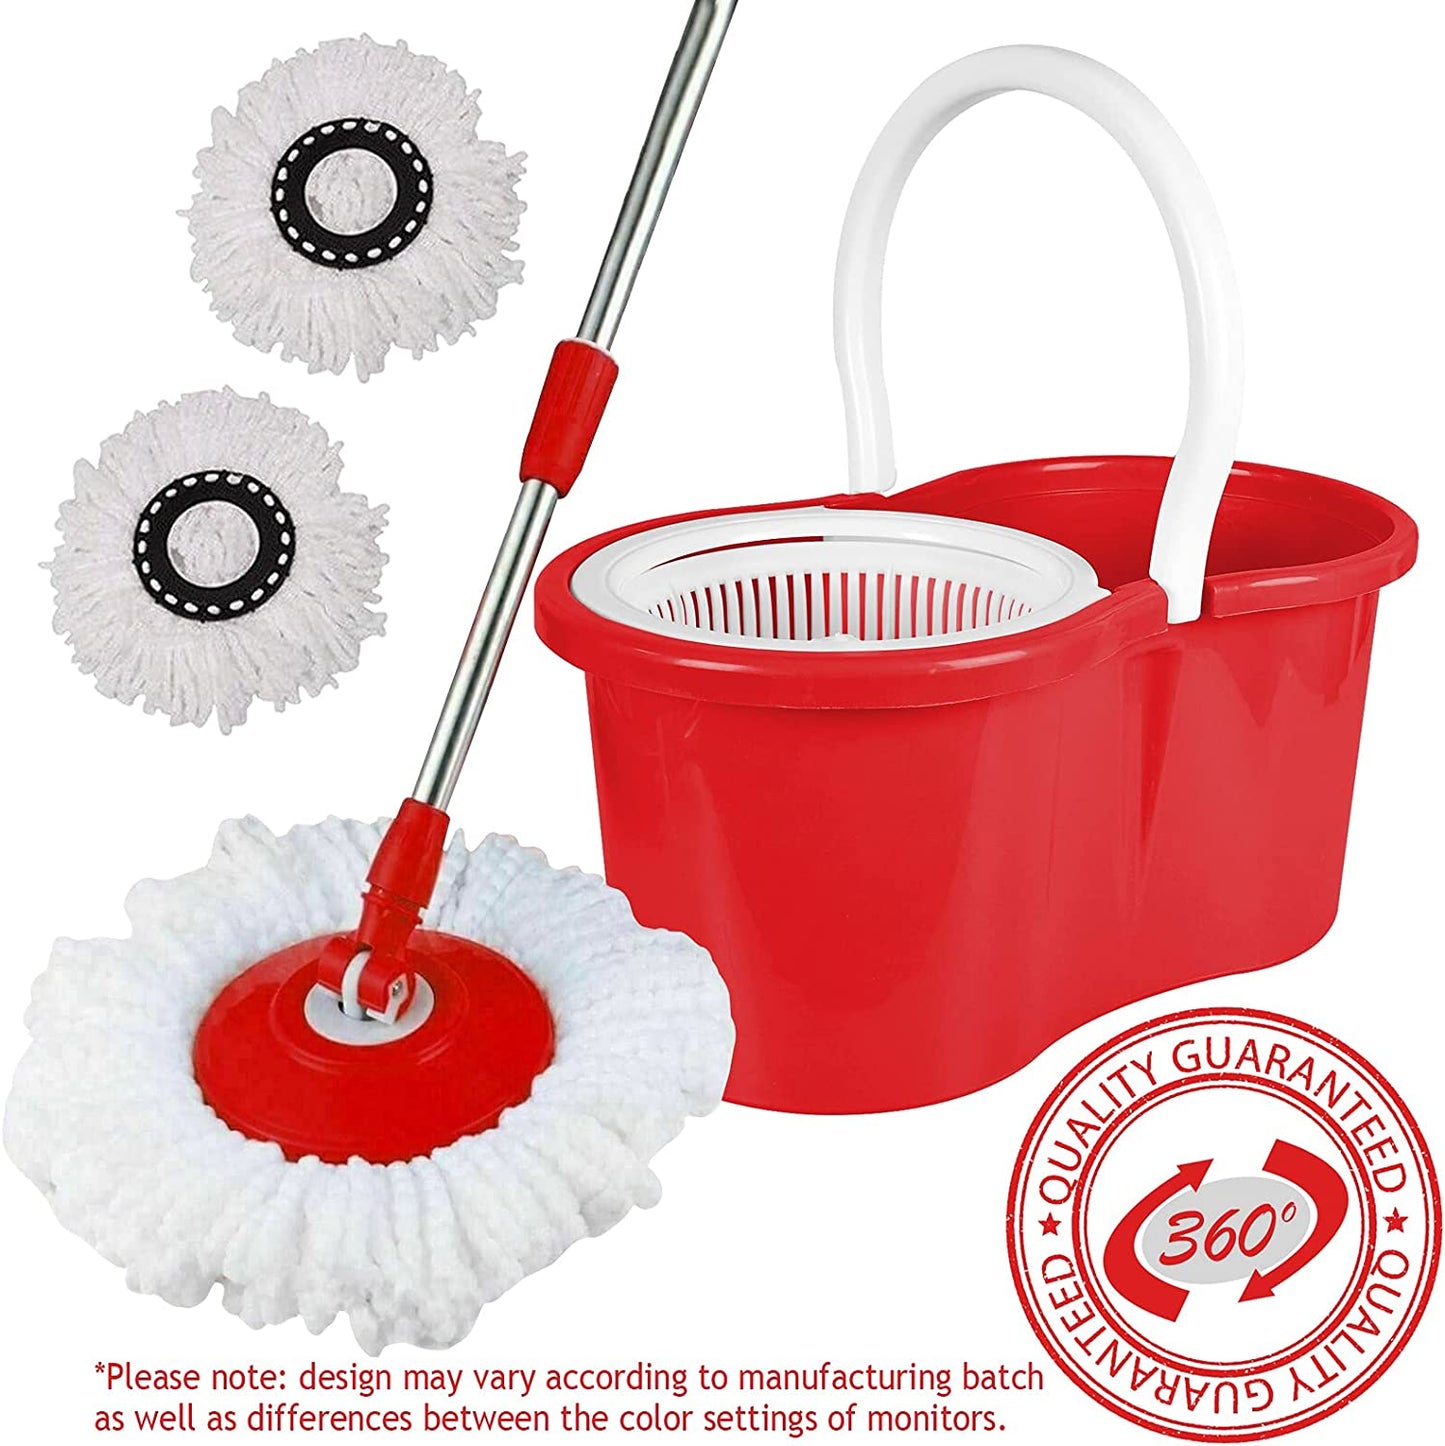 Mop Floor Cleaner with Spin Bucket 360 Rotation